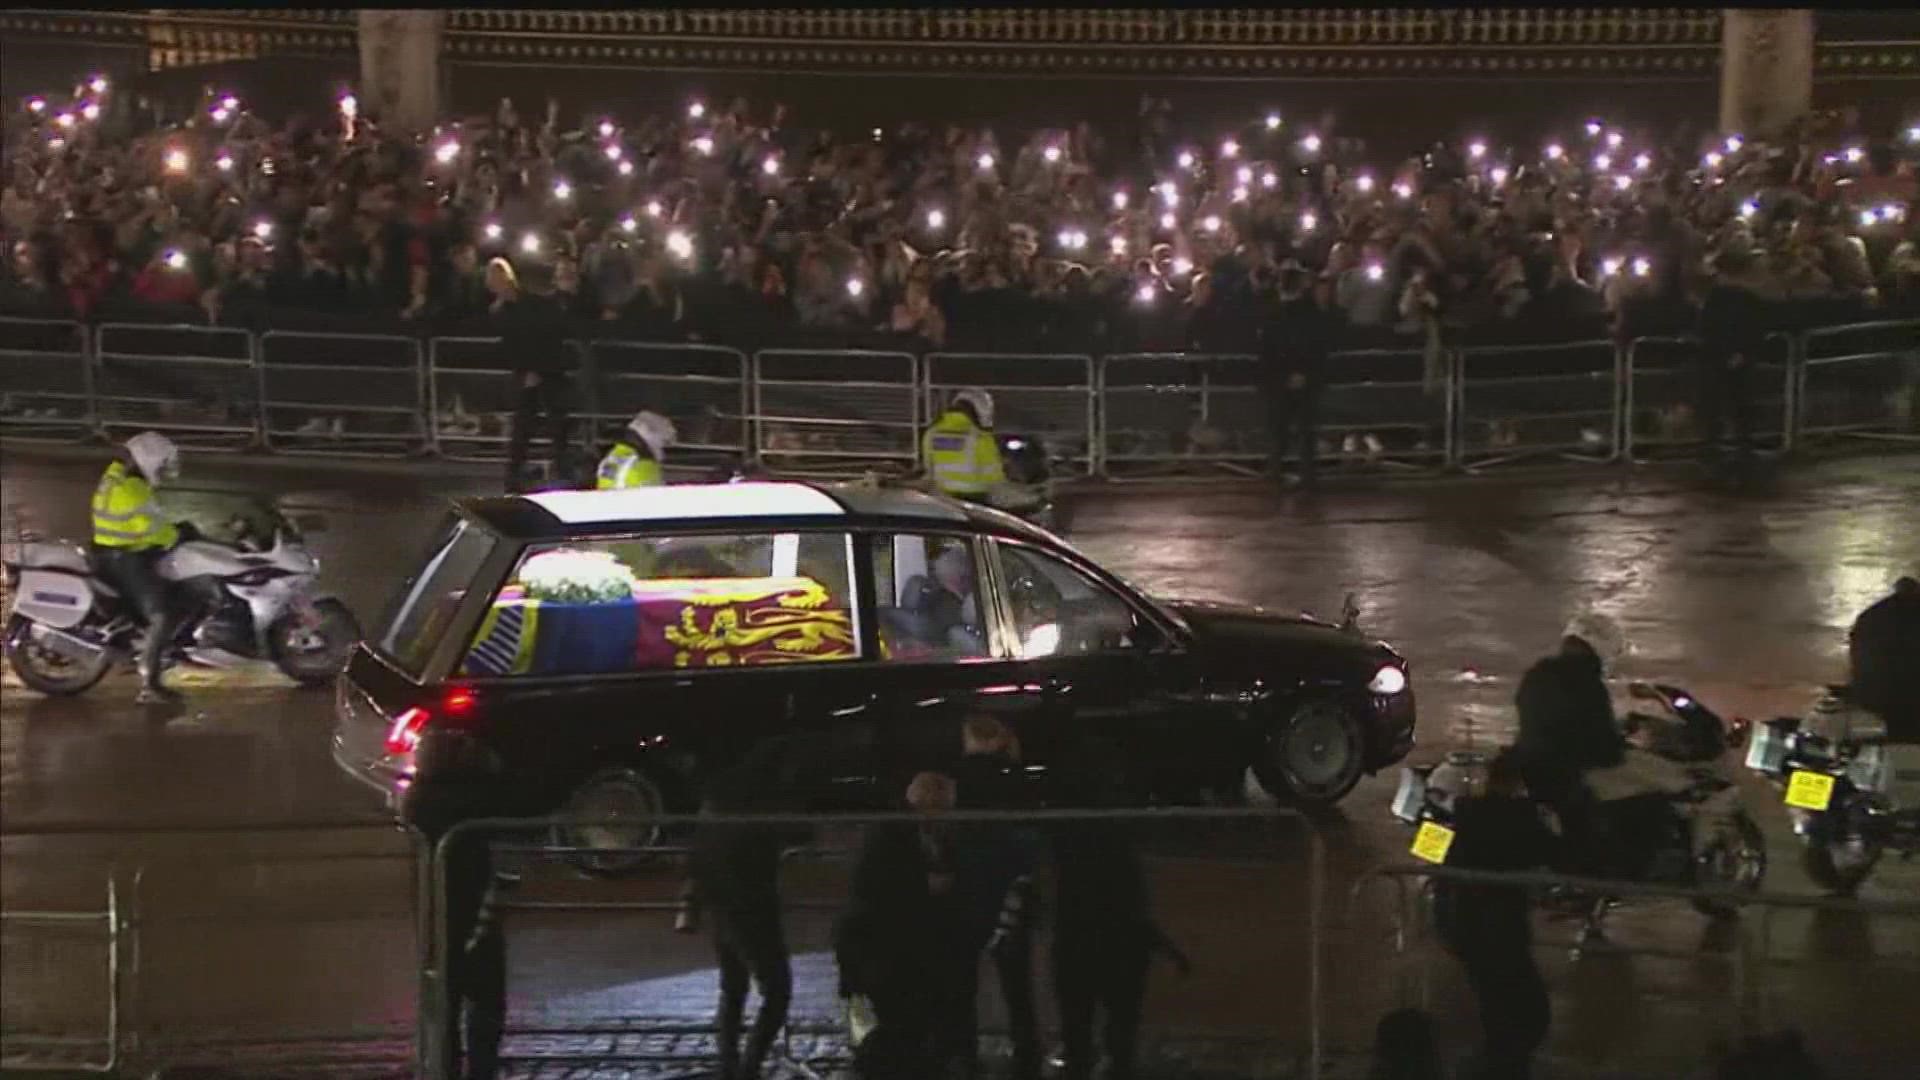 Queen Elizabeth II arrived earlier tonight from Scotland. She will lie in state until her funeral on Monday.